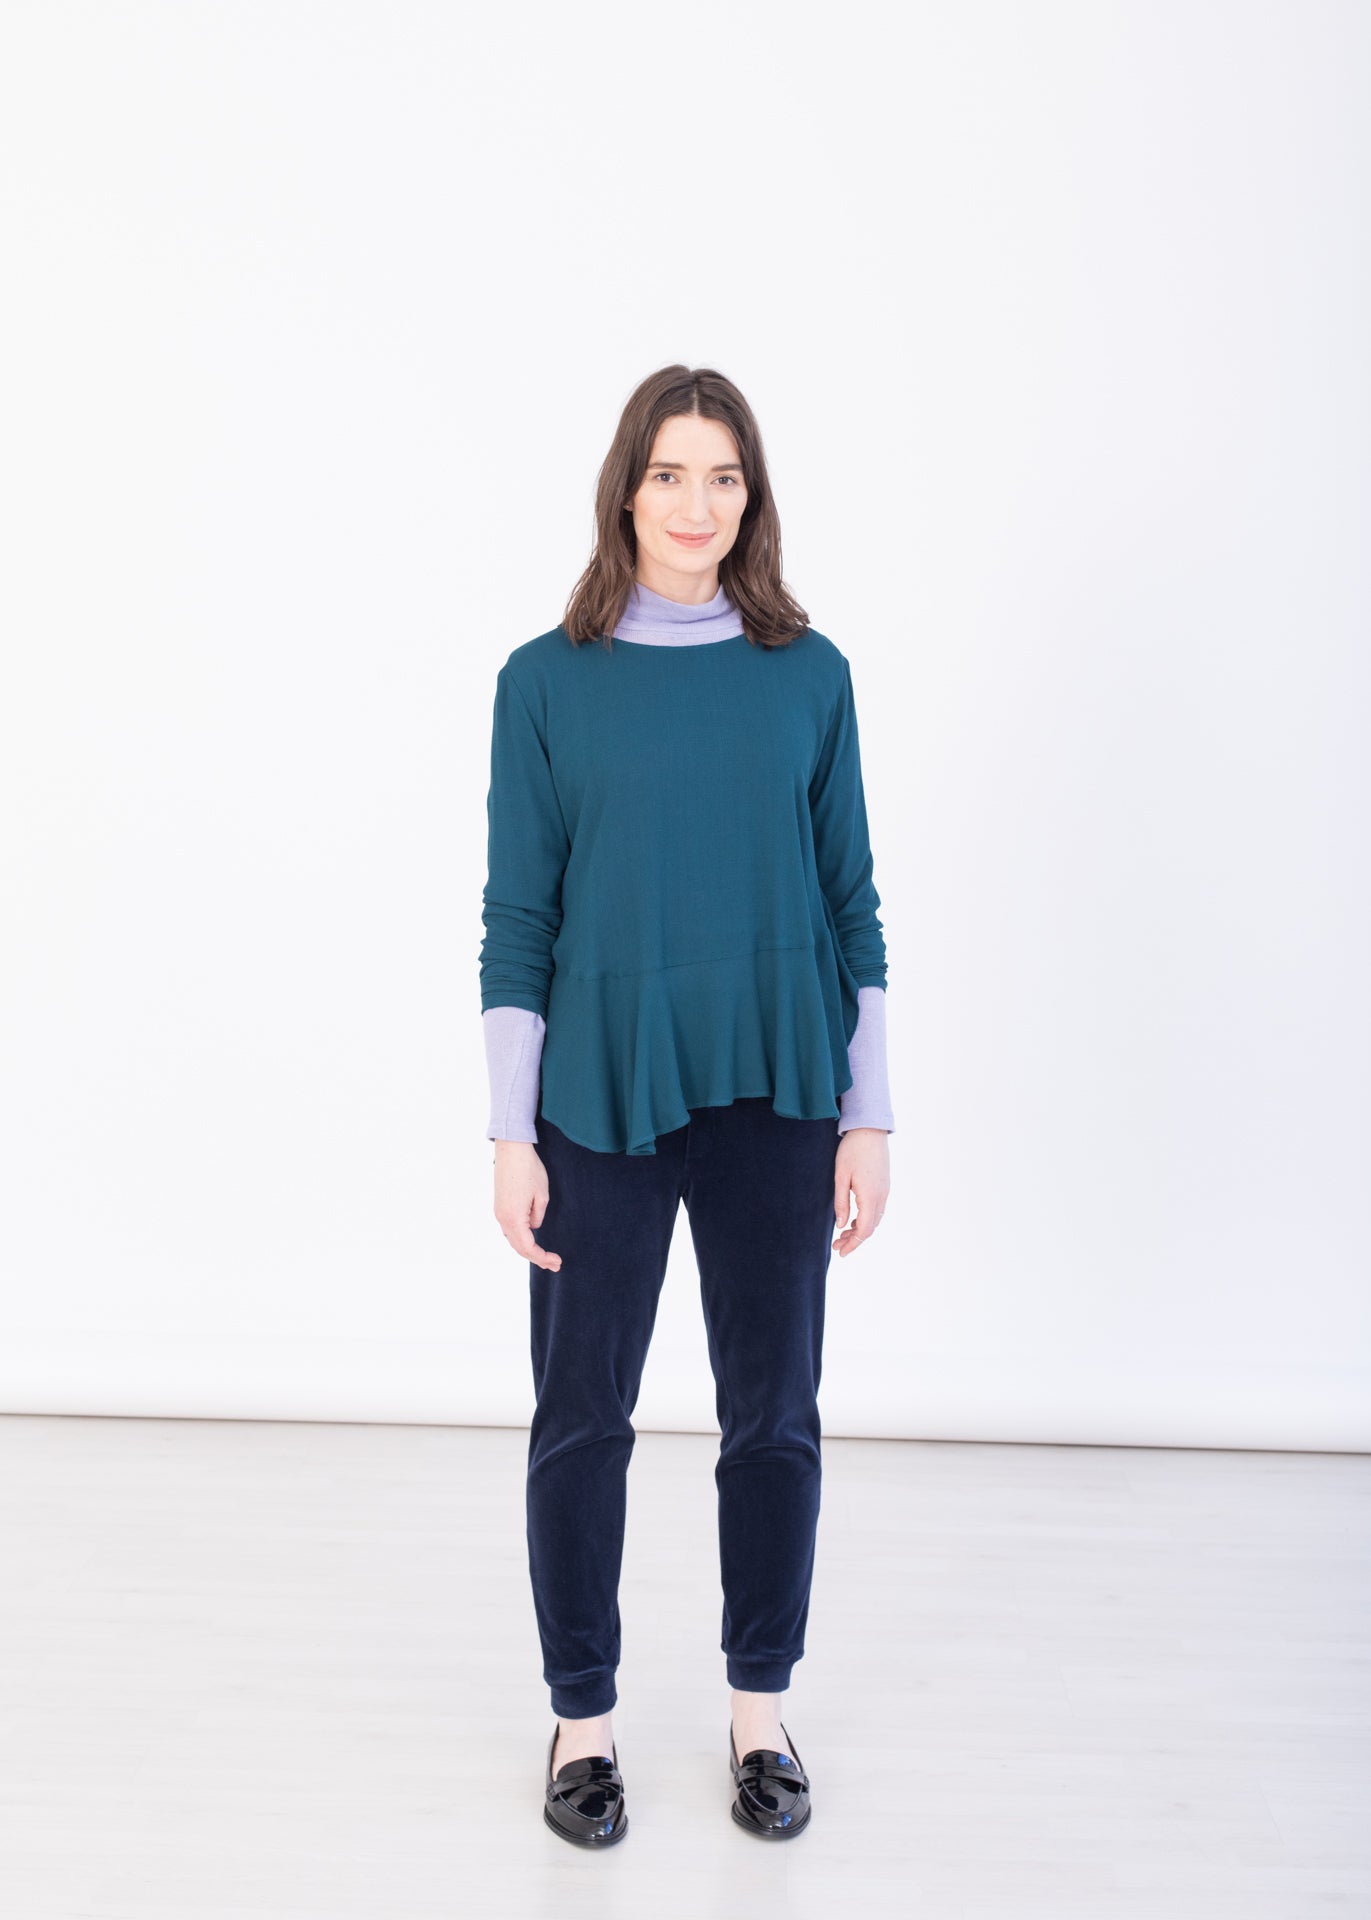 Midnight – Top in Teal